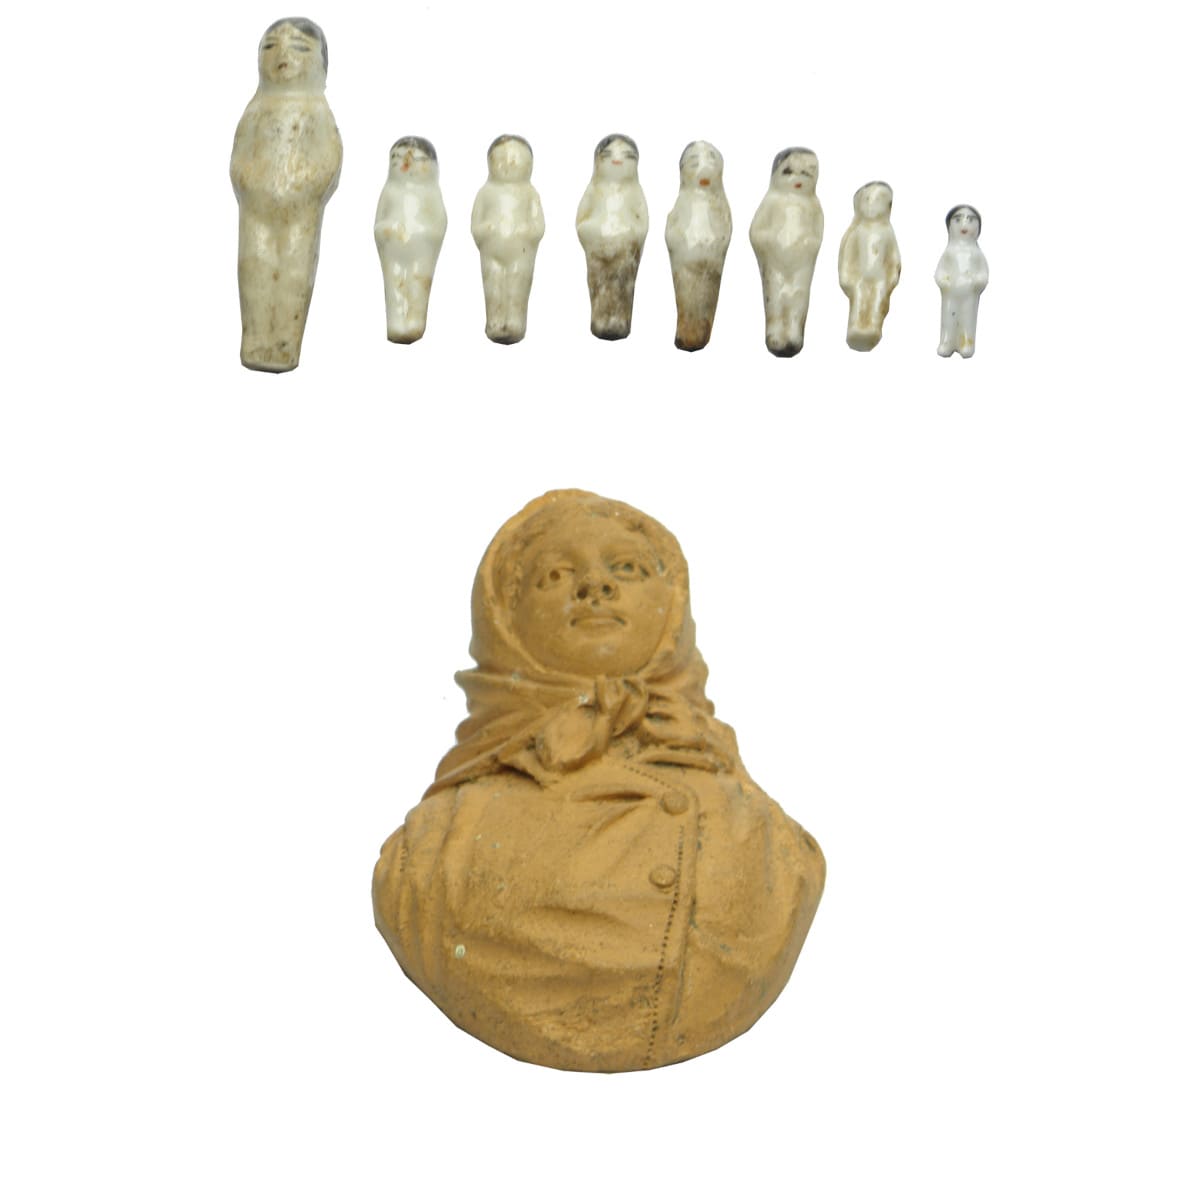 9 Dolls. 8 pudding dolls in 4 sizes and a Terracotta bust of shawled lady.